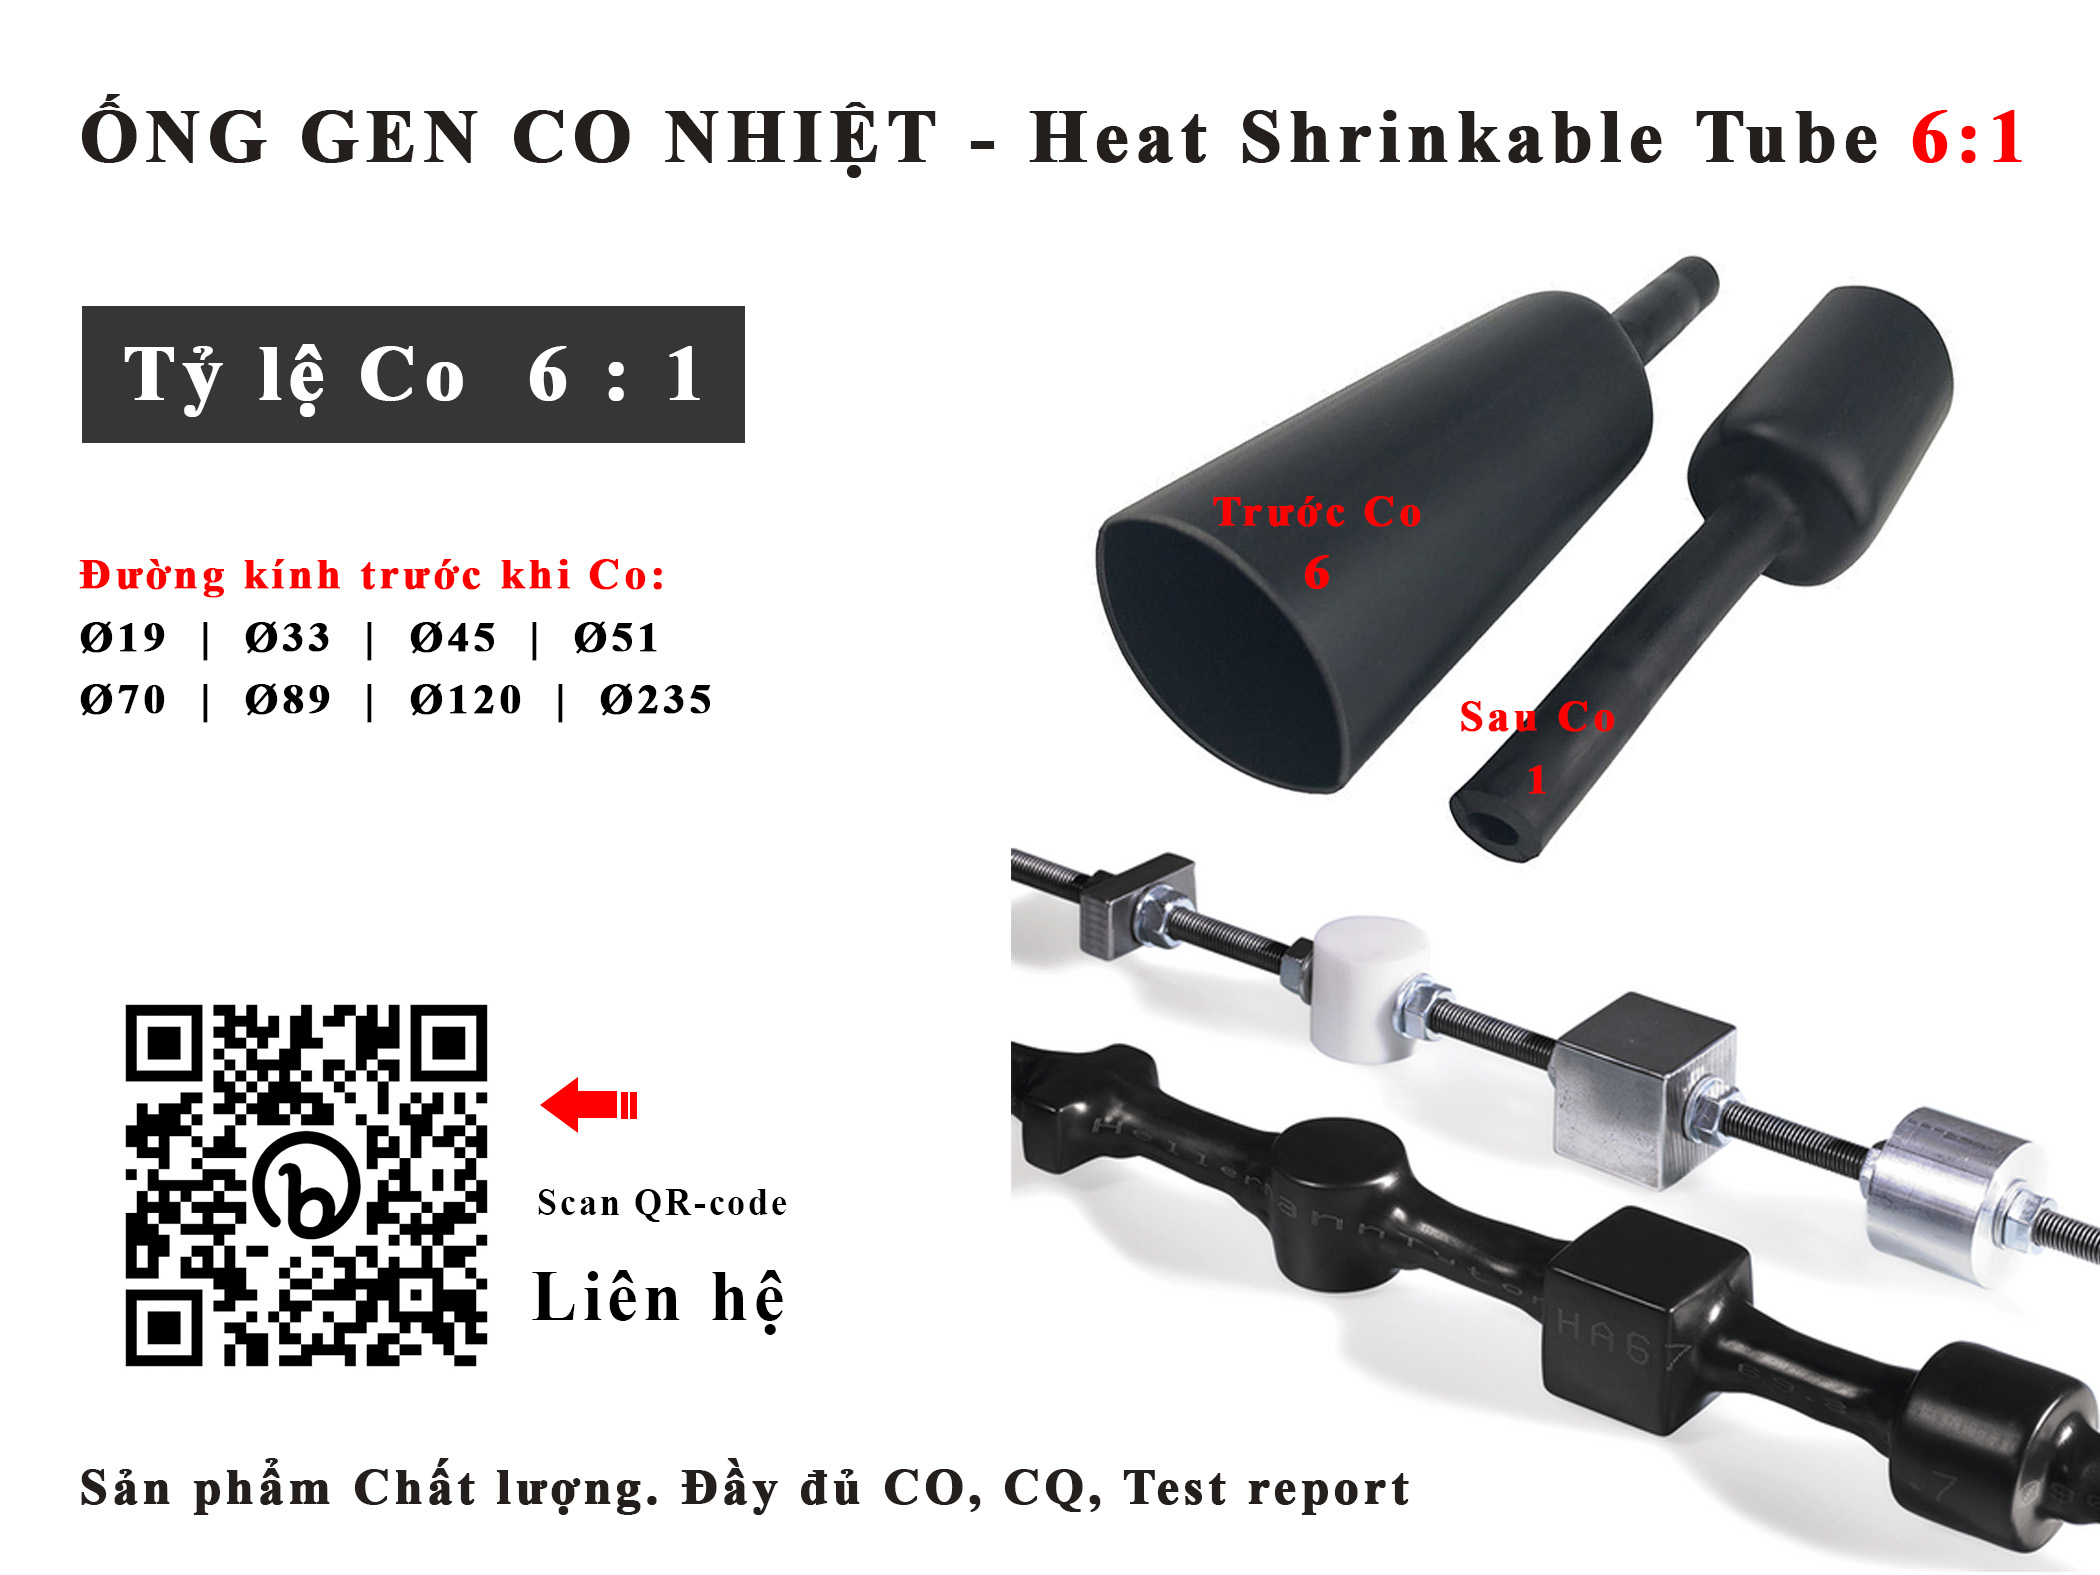 ống co nhiệt; ống gen co nhiệt; gen co nhiệt; gen co nhiệt cách điện; ong co nhiet; ong gen co nhiet; gen co nhiet; gen co nhiet cach dien; gen co nhiệt bọc dây điện; ống gen co nhiệt cách điện; dây co nhiệt; ống gen chịu nhiệt chống cháy; gen co nhiệt trong suốt; ống co nhiệt trung thế; ống gen co nhiệt trung thế; ống co nhiệt trung thế 3m; ống co nhiệt trung thế raychem; ống co nhiệt phi 2mm; ống gen co nhiệt phi 6; ống gen co nhiệt phi 10; ống gen co nhiệt phi 16; ống gen co nhiệt phi 20; ống gen co nhiệt phi 25; ống gen co nhiệt phi 30; ống gen co nhiệt phi 40; ống gen co nhiệt phi 50; ống gen co nhiệt phi 120; ống co nhiệt loại lớn; ống cao su co nhiệt; ống co nhiệt có keo; ống gen co nhiệt có keo; adhesive lined heat shrink tube; glue lined heat shrink tubing; medium wall heat shrink tubing; heat shrink tube for outdoor environment; waterproof heat shrink tube; shrink ratio 3:1; uv resistant heat shrink tube; mwtm sst-m sst-fr raychem te connectivity; compliance with rohs ; irrax™sleeve scm2 scd sumitube; 3m imcsn mdt; ls tube adhesive-lined lg-catv lg-phwt ls-phwt-fr lg-pmwt ls-pmwt-fr; gala gmw ghw; dsg-canusa cfm;